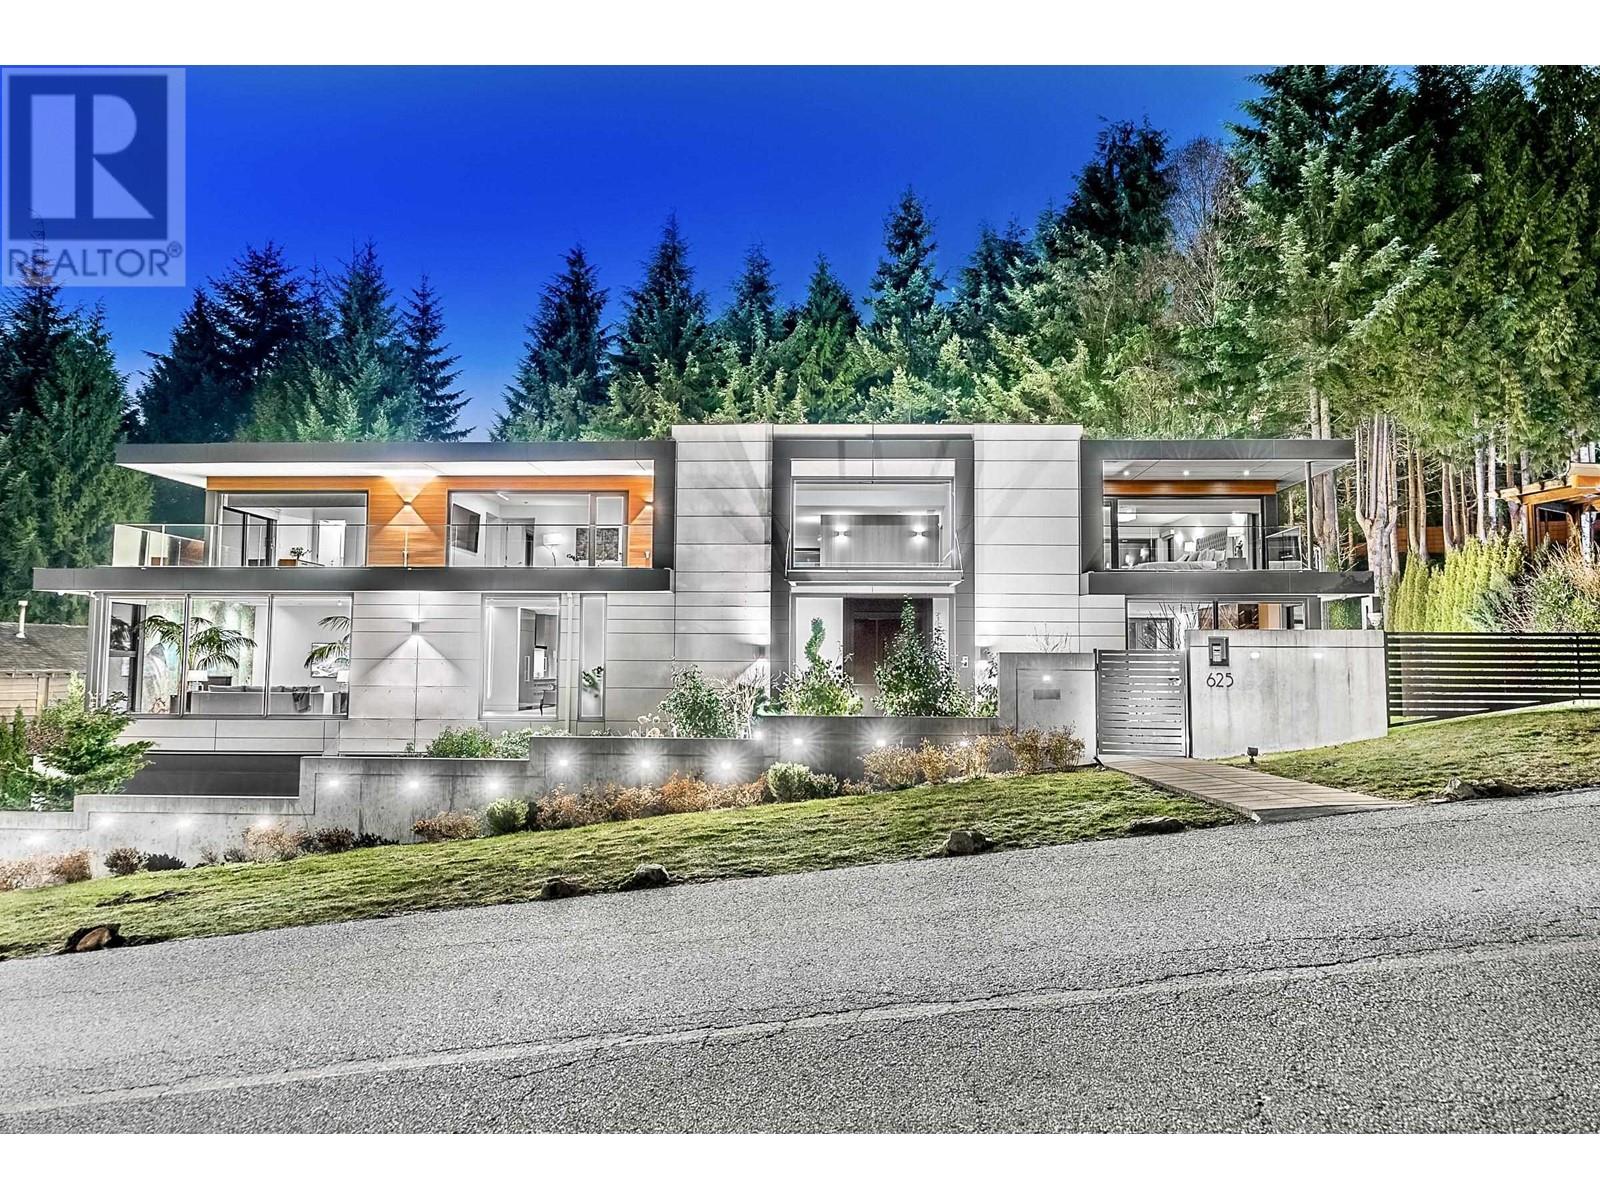 625 ST. ANDREWS ROAD, west vancouver, British Columbia